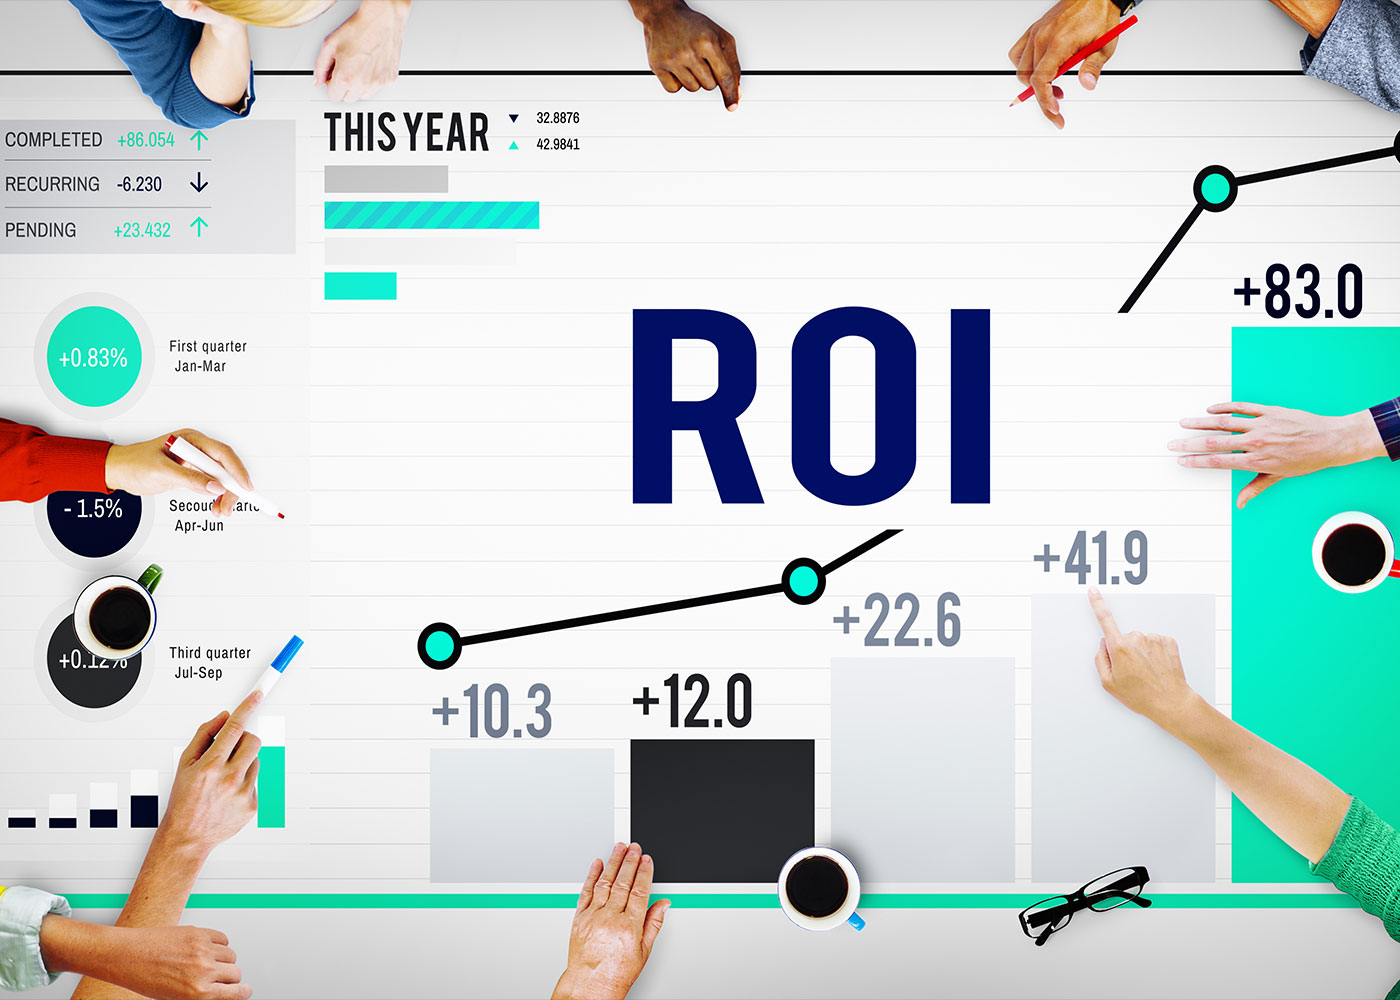 How a Production Company can Measure the ROI of Their Video